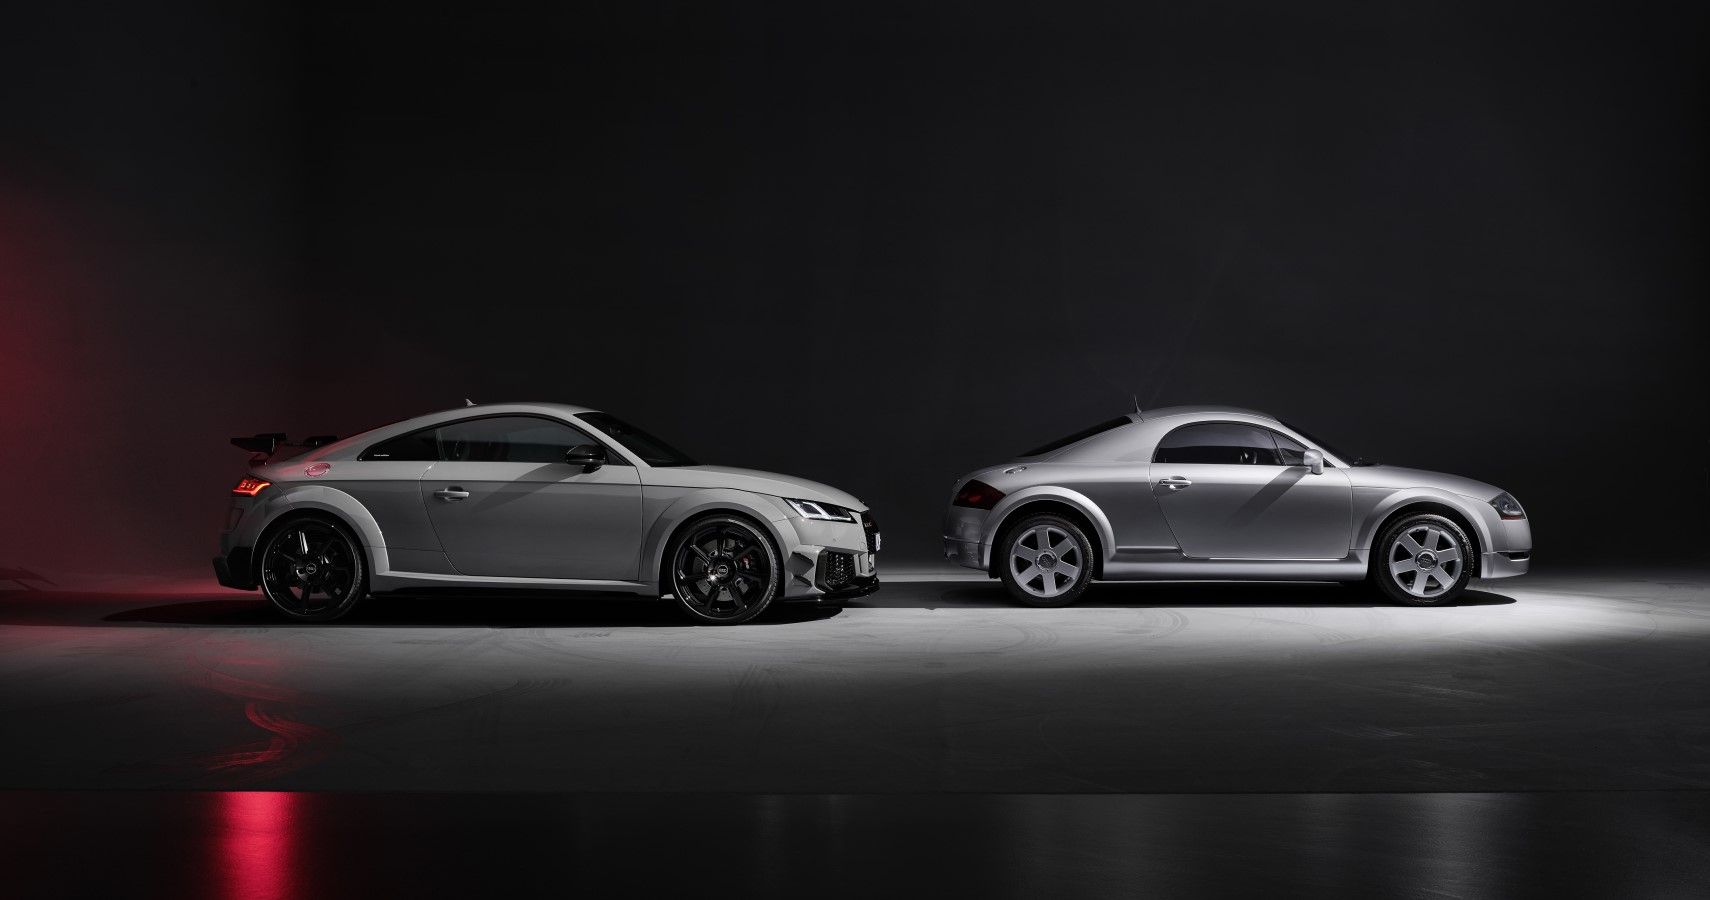 Audi TT RS Coupe Iconic Edition with the first-gen Audi TT side view comparison